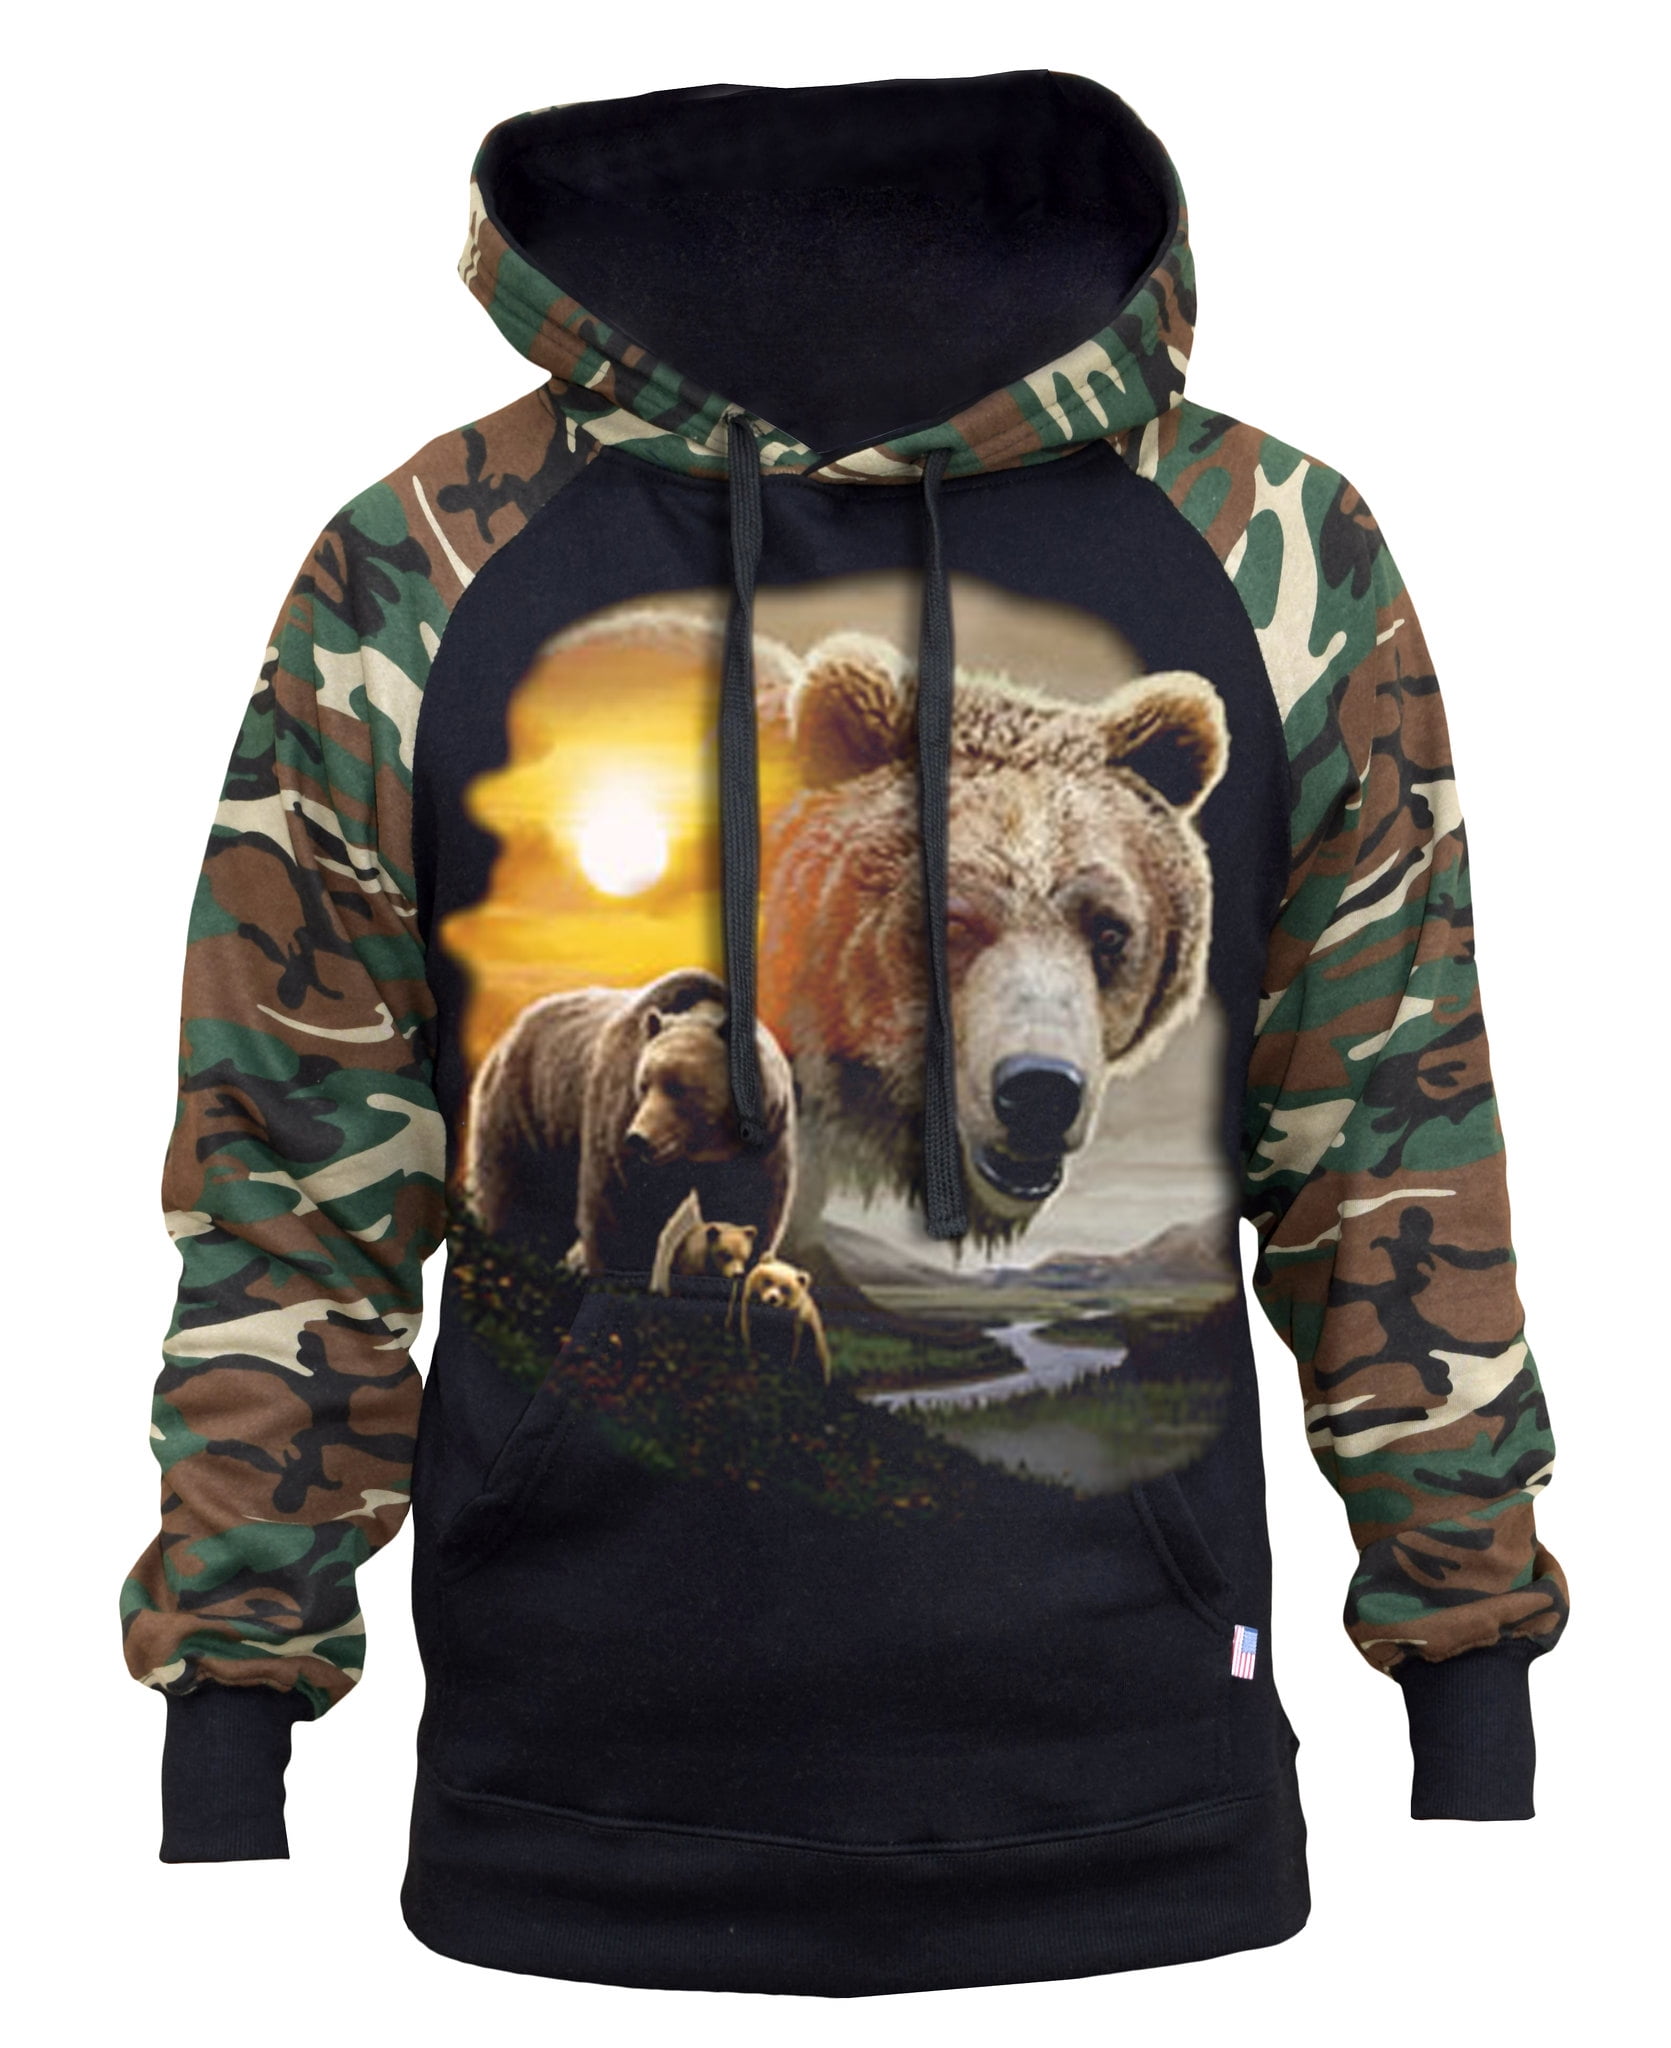 Interstate Apparel Mens American Grizzly Bear Sun Black Pullover Hoodie Sweater Black 